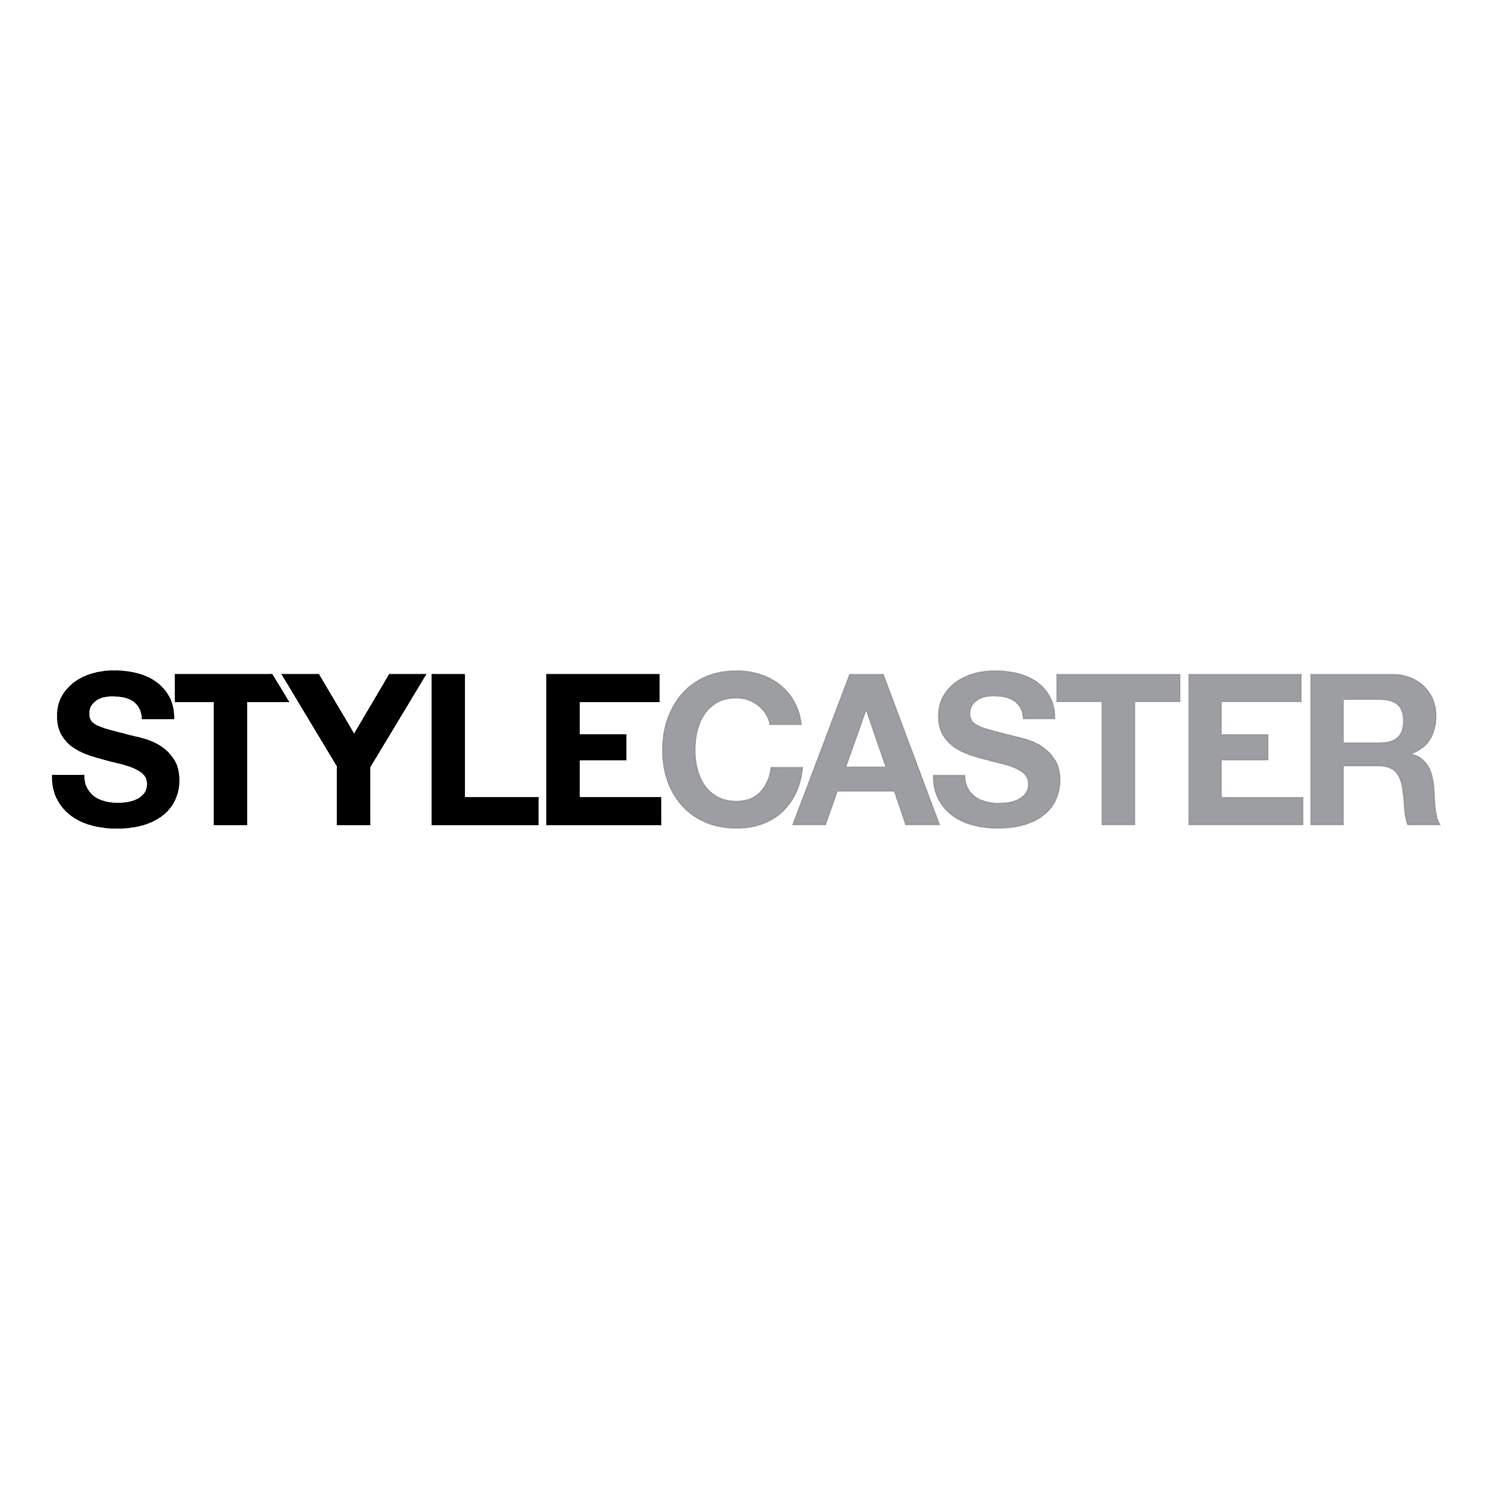 Recognized by STYLECASTER as Being MORE Than Just a Pretty Face - SAVE ME FROM